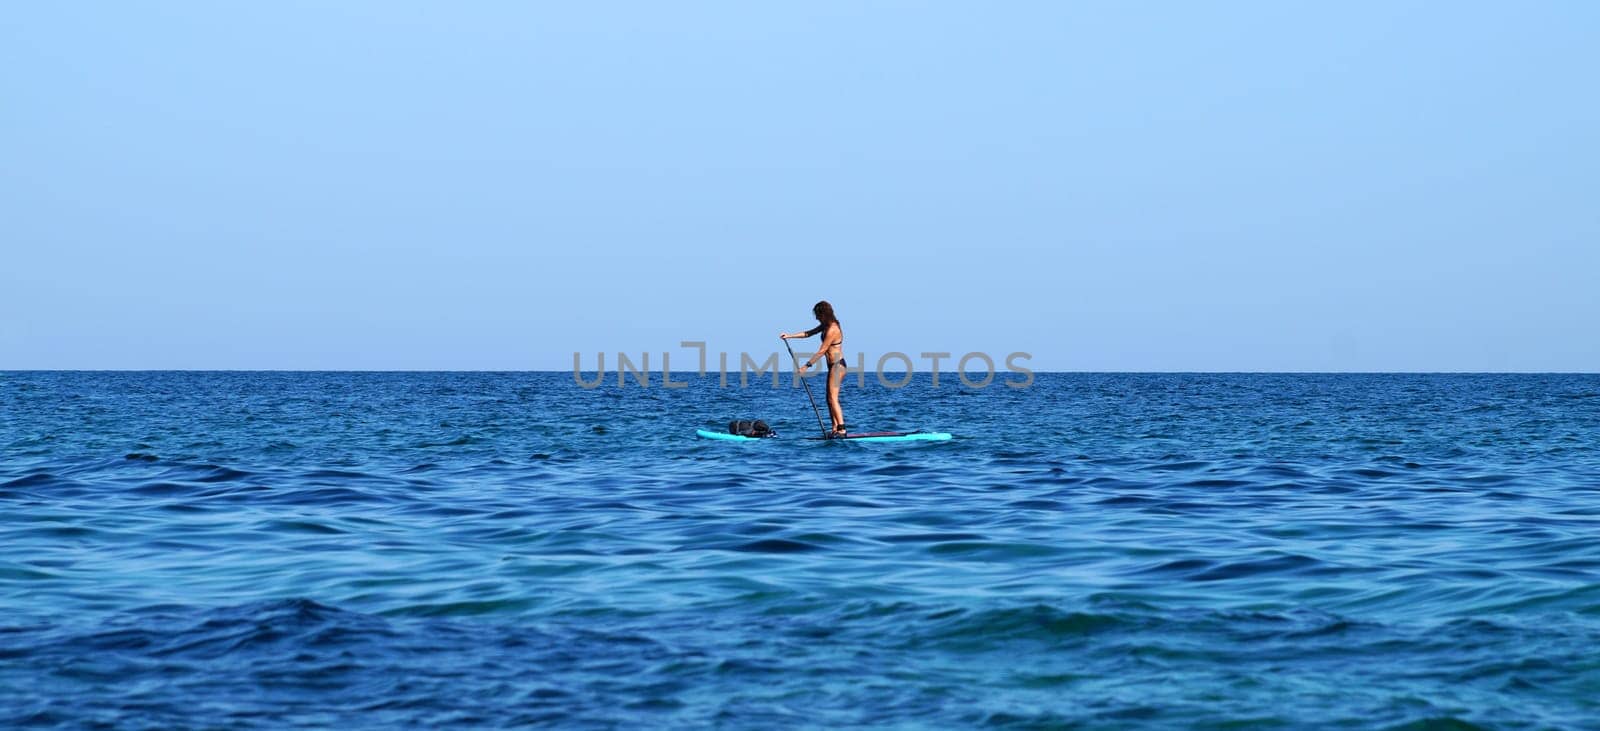 Varna, Bulgaria - September,7, 2020: A woman standing on a SUP board with an oar floats on the sea